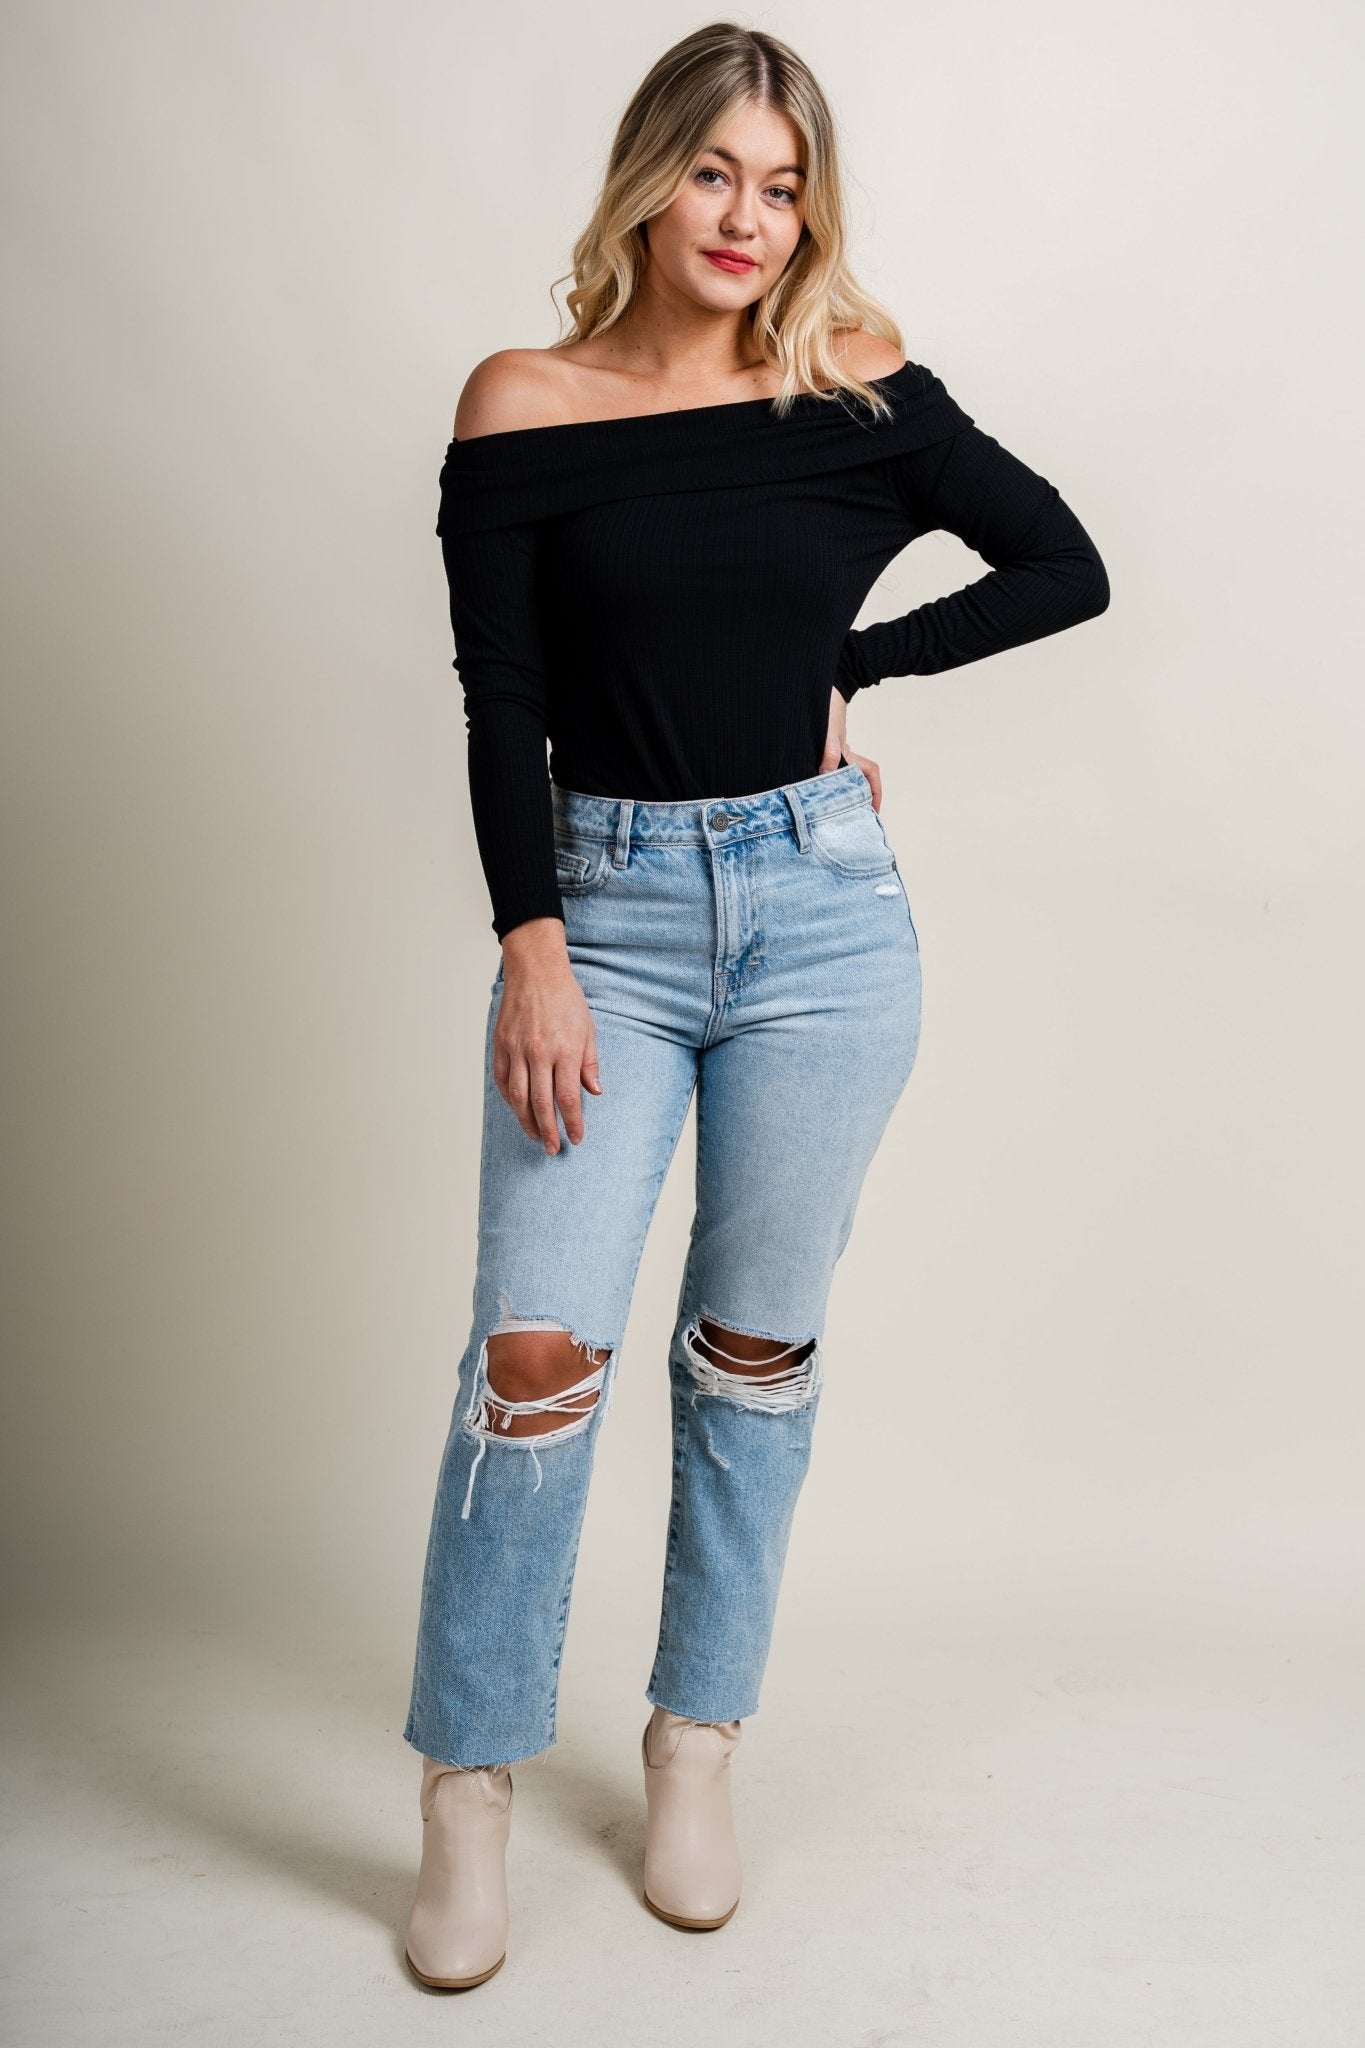 Z Supply Elena off shoulder top black - Z Supply Top - Z Supply Clothing at Lush Fashion Lounge Trendy Boutique Oklahoma City